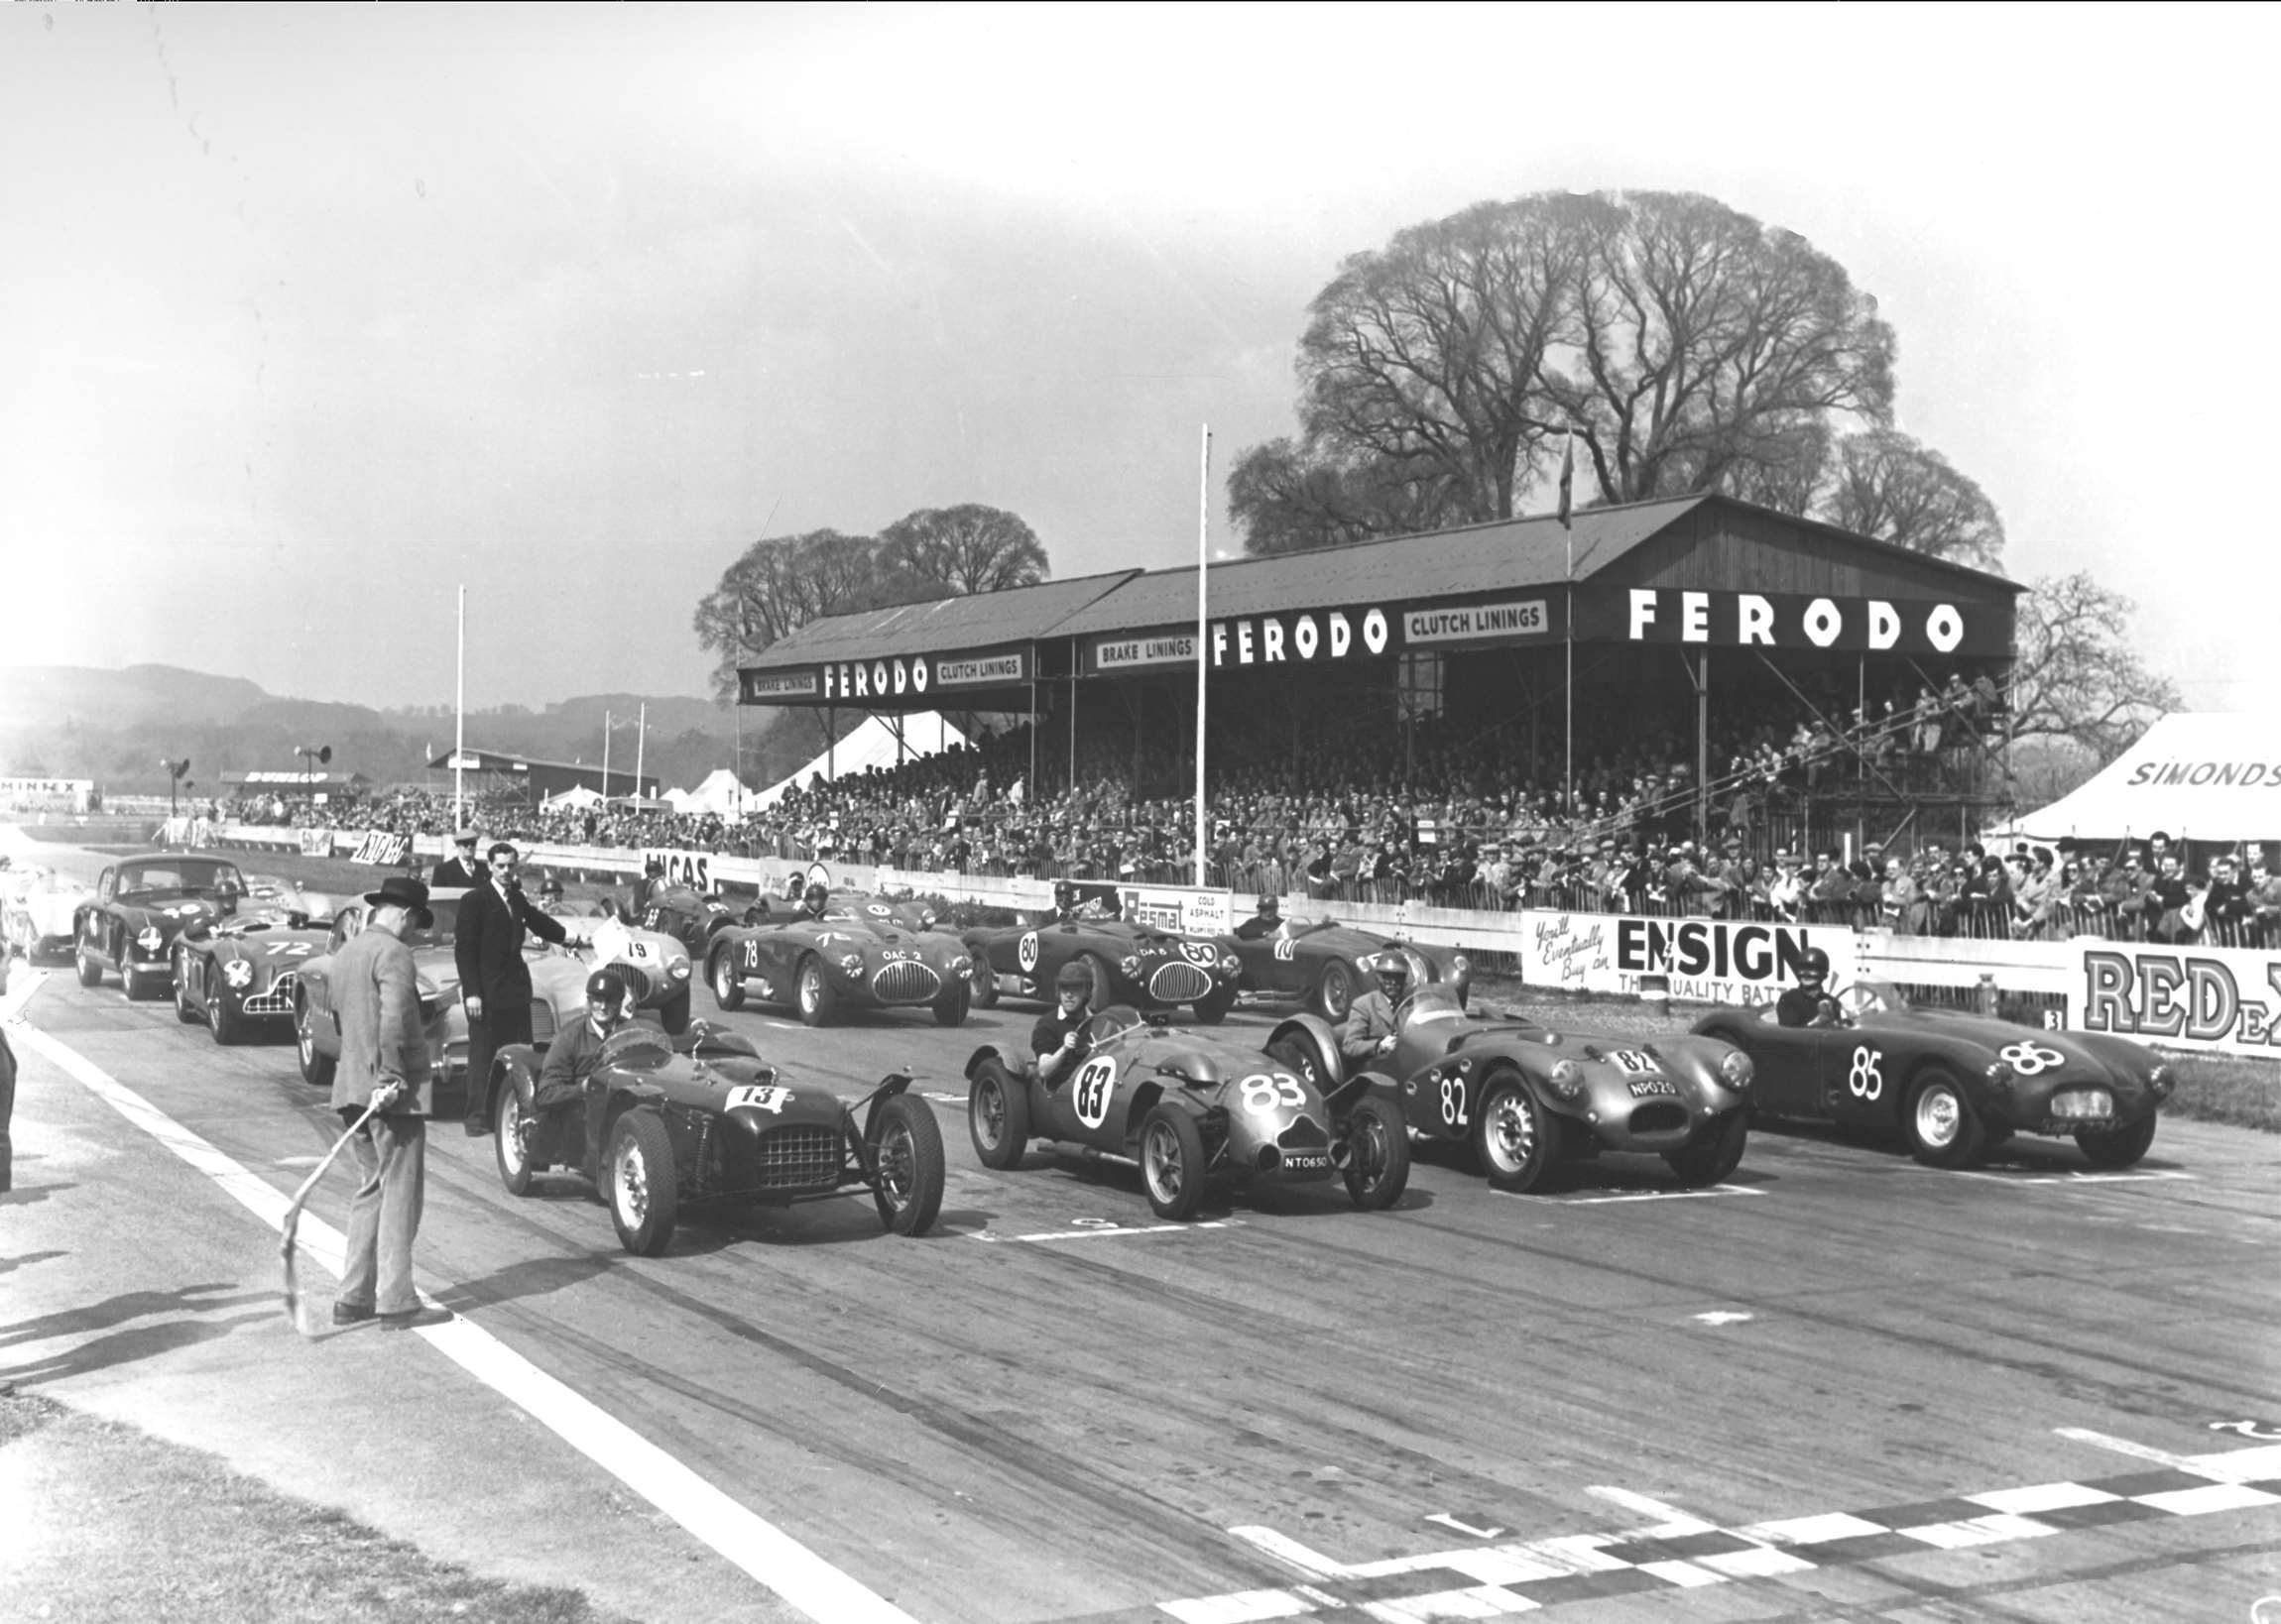 Typical Goodwood special sports car handicap, 1954 Easter Monday  - Mike Anthony (Lotus 6), Brian Naylor (Cooper-MG), Gerry Ruddock (Lester-MG) and Dick Steed (JAG-MG) flagged away from the front row.